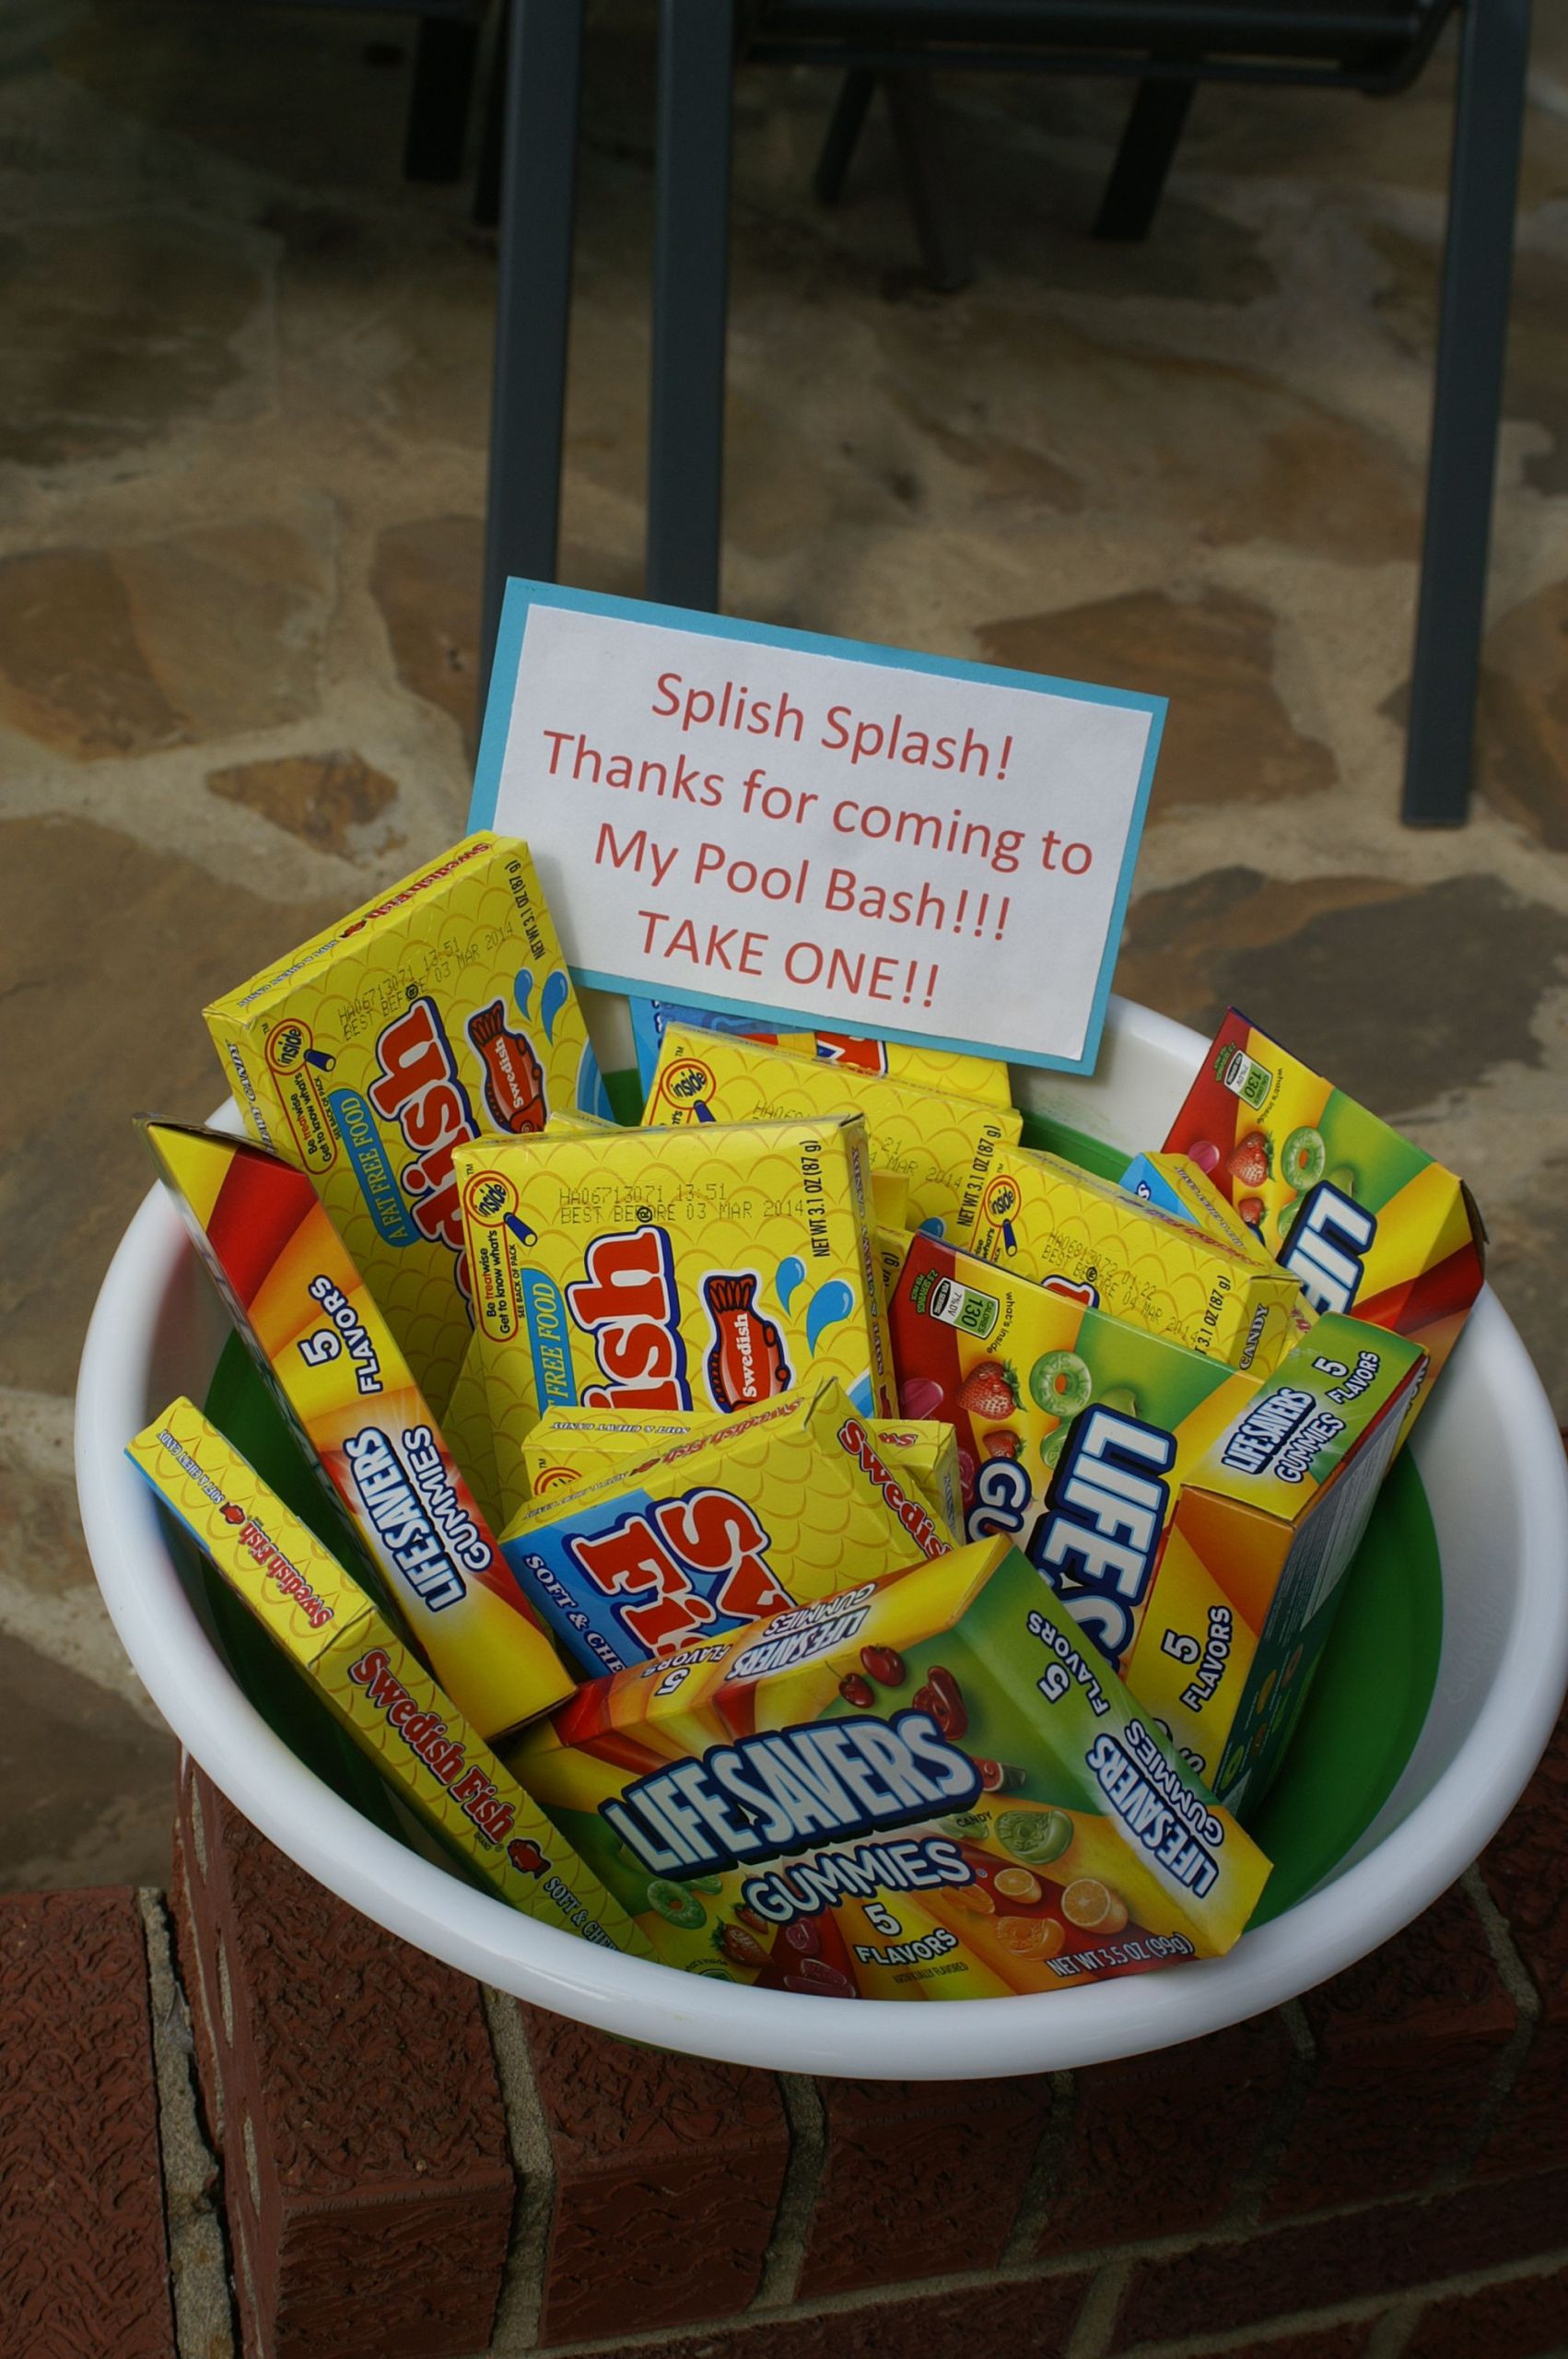 Party Favor Ideas For Pool Party
 party favors for pool beach party eping it simple